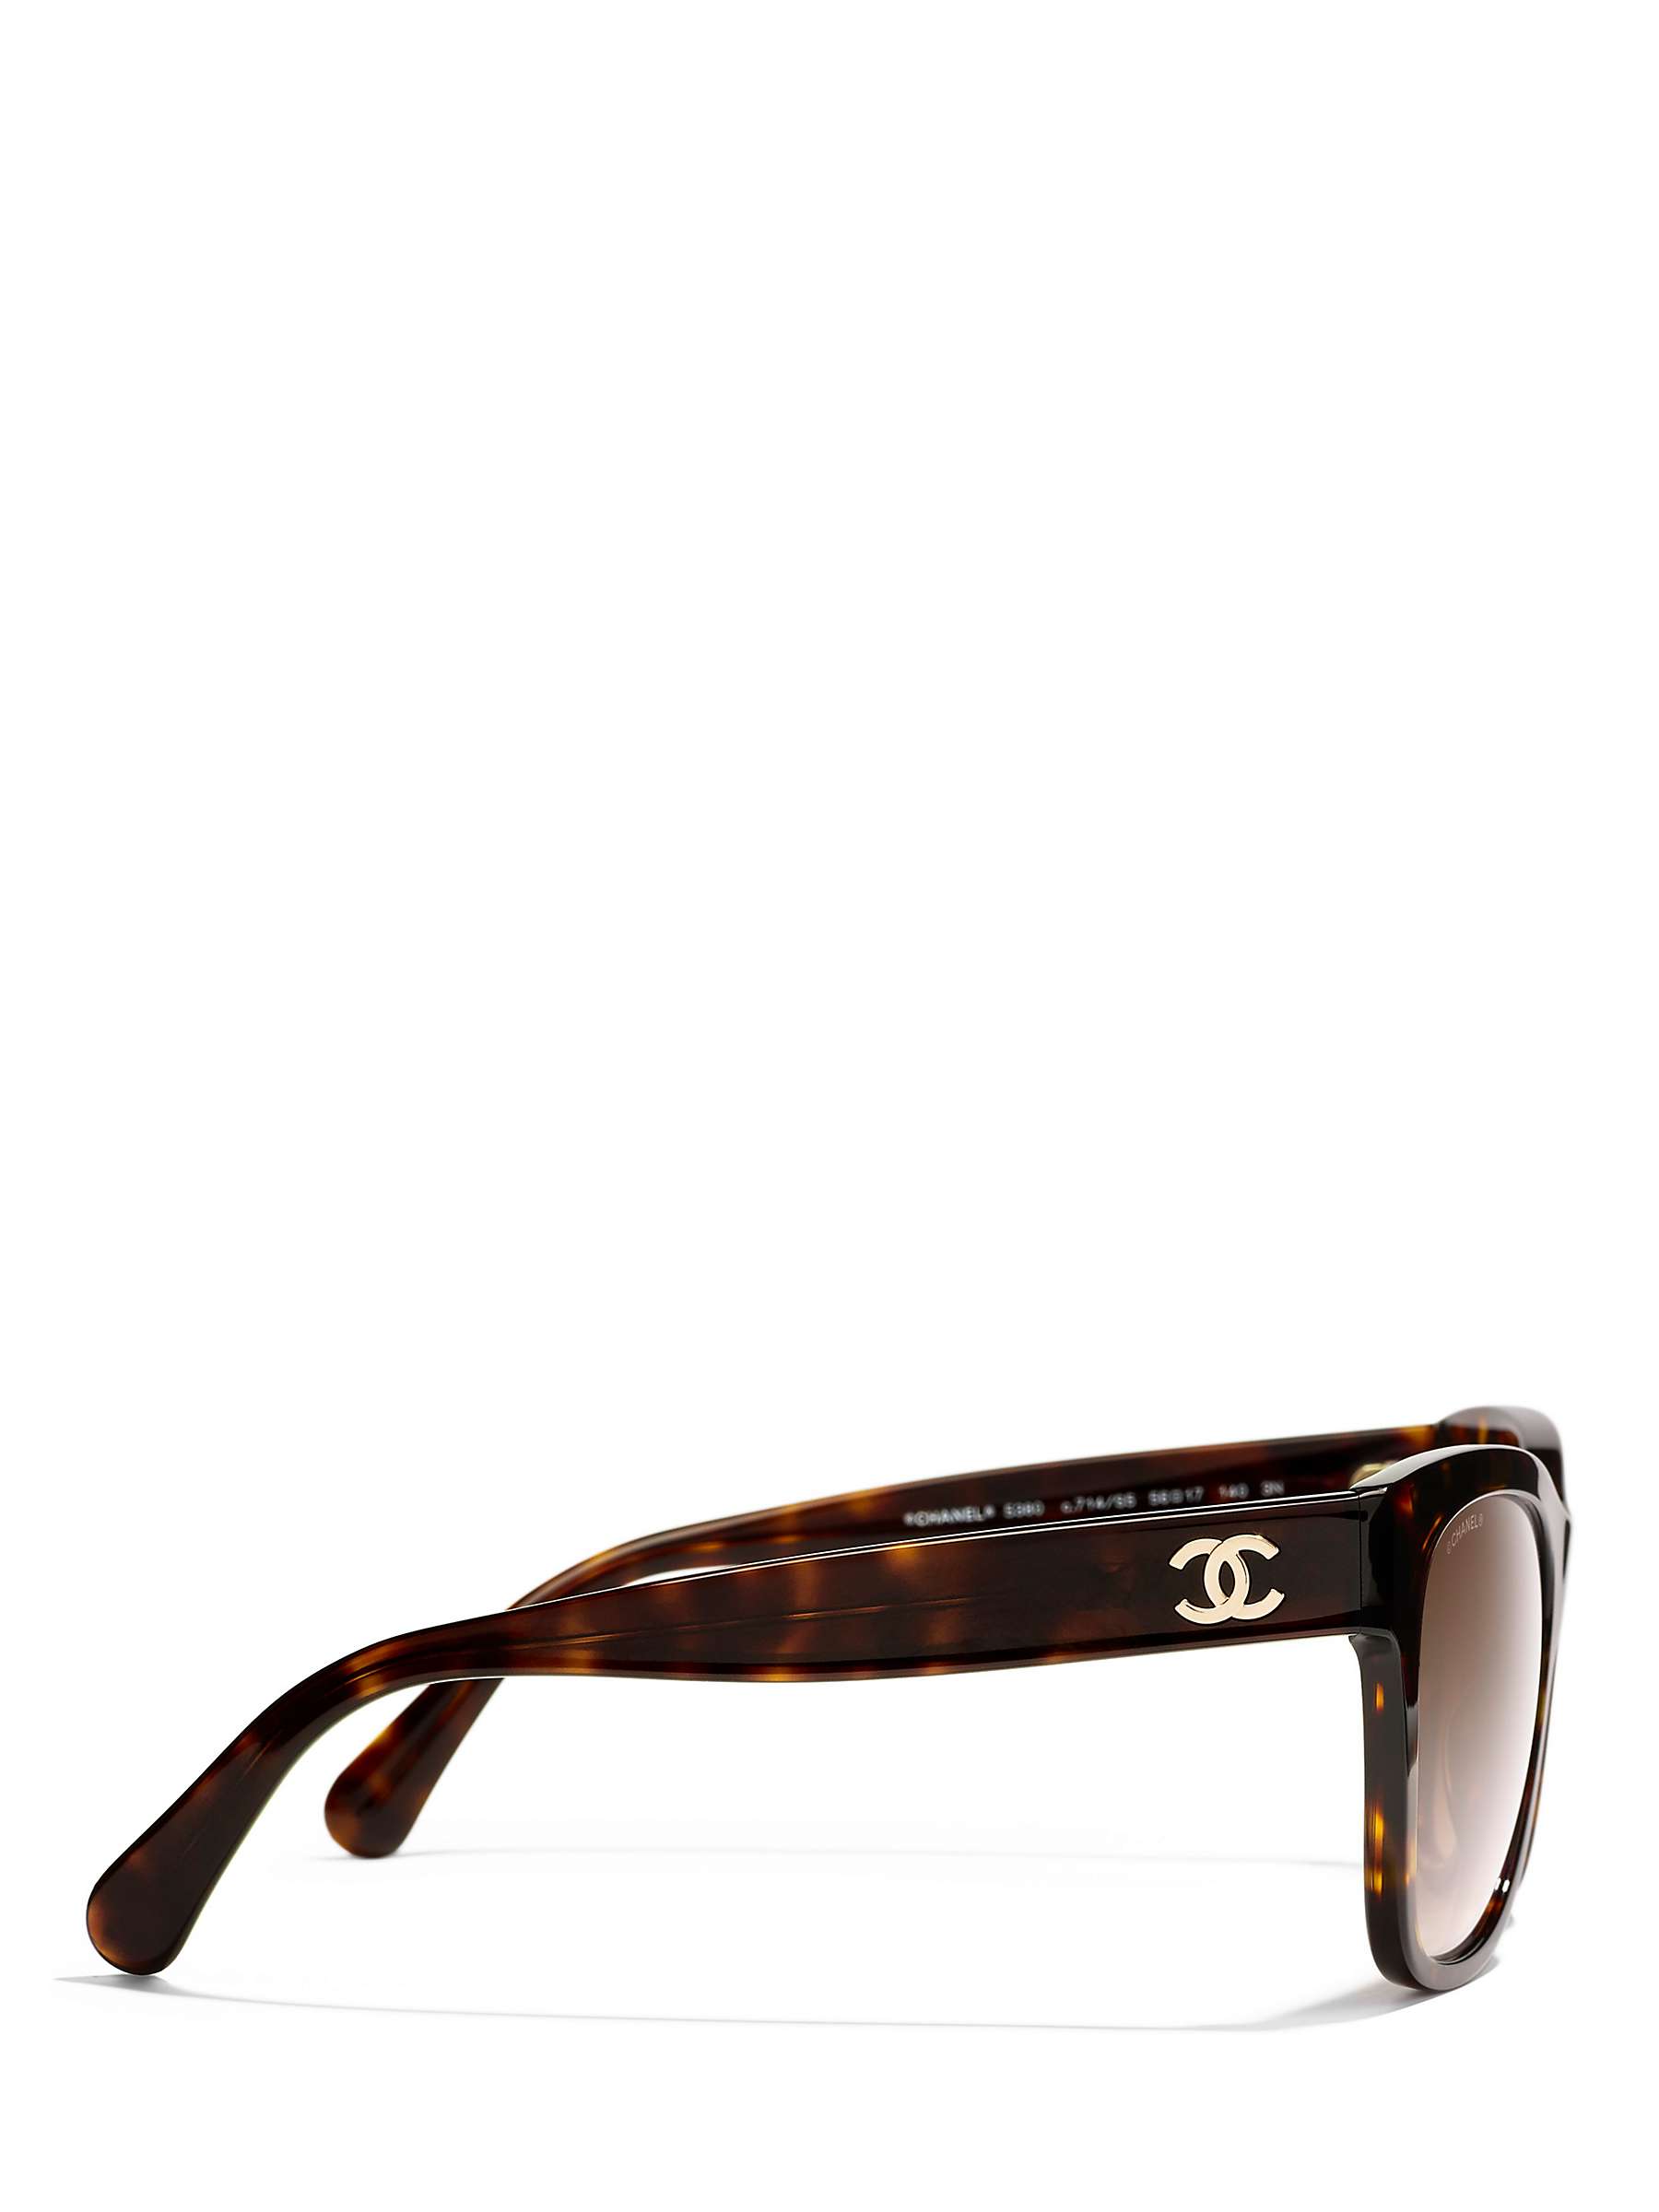 Buy CHANEL Square Sunglasses CH5380 Tortoise/Brown Gradient Online at johnlewis.com